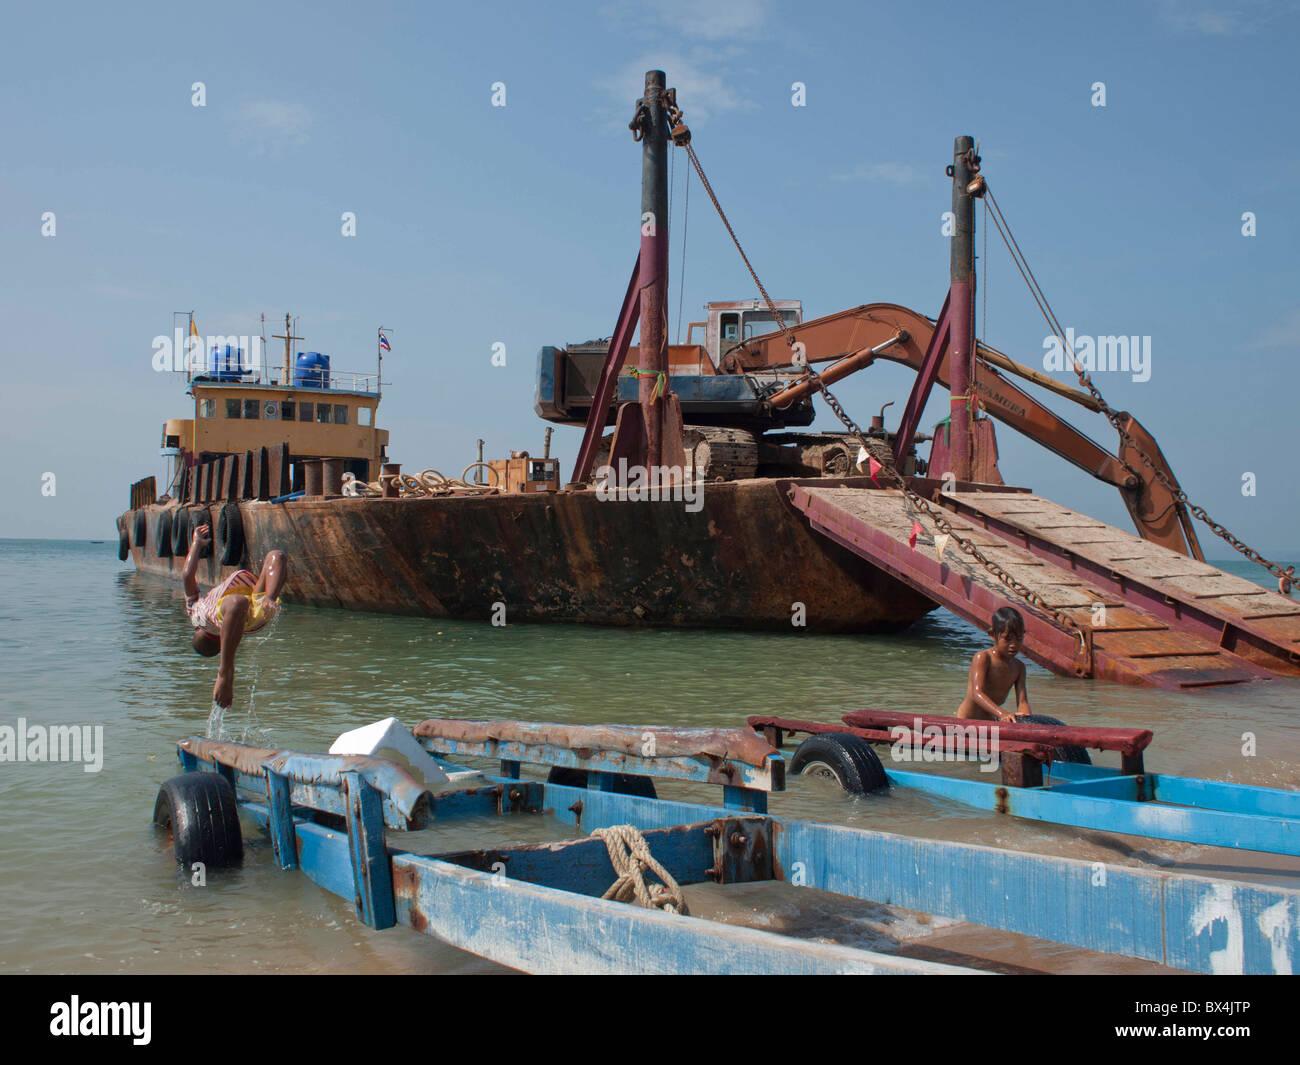 The boys are jumping swimming next to the rusty boat on the beach Stock Photo